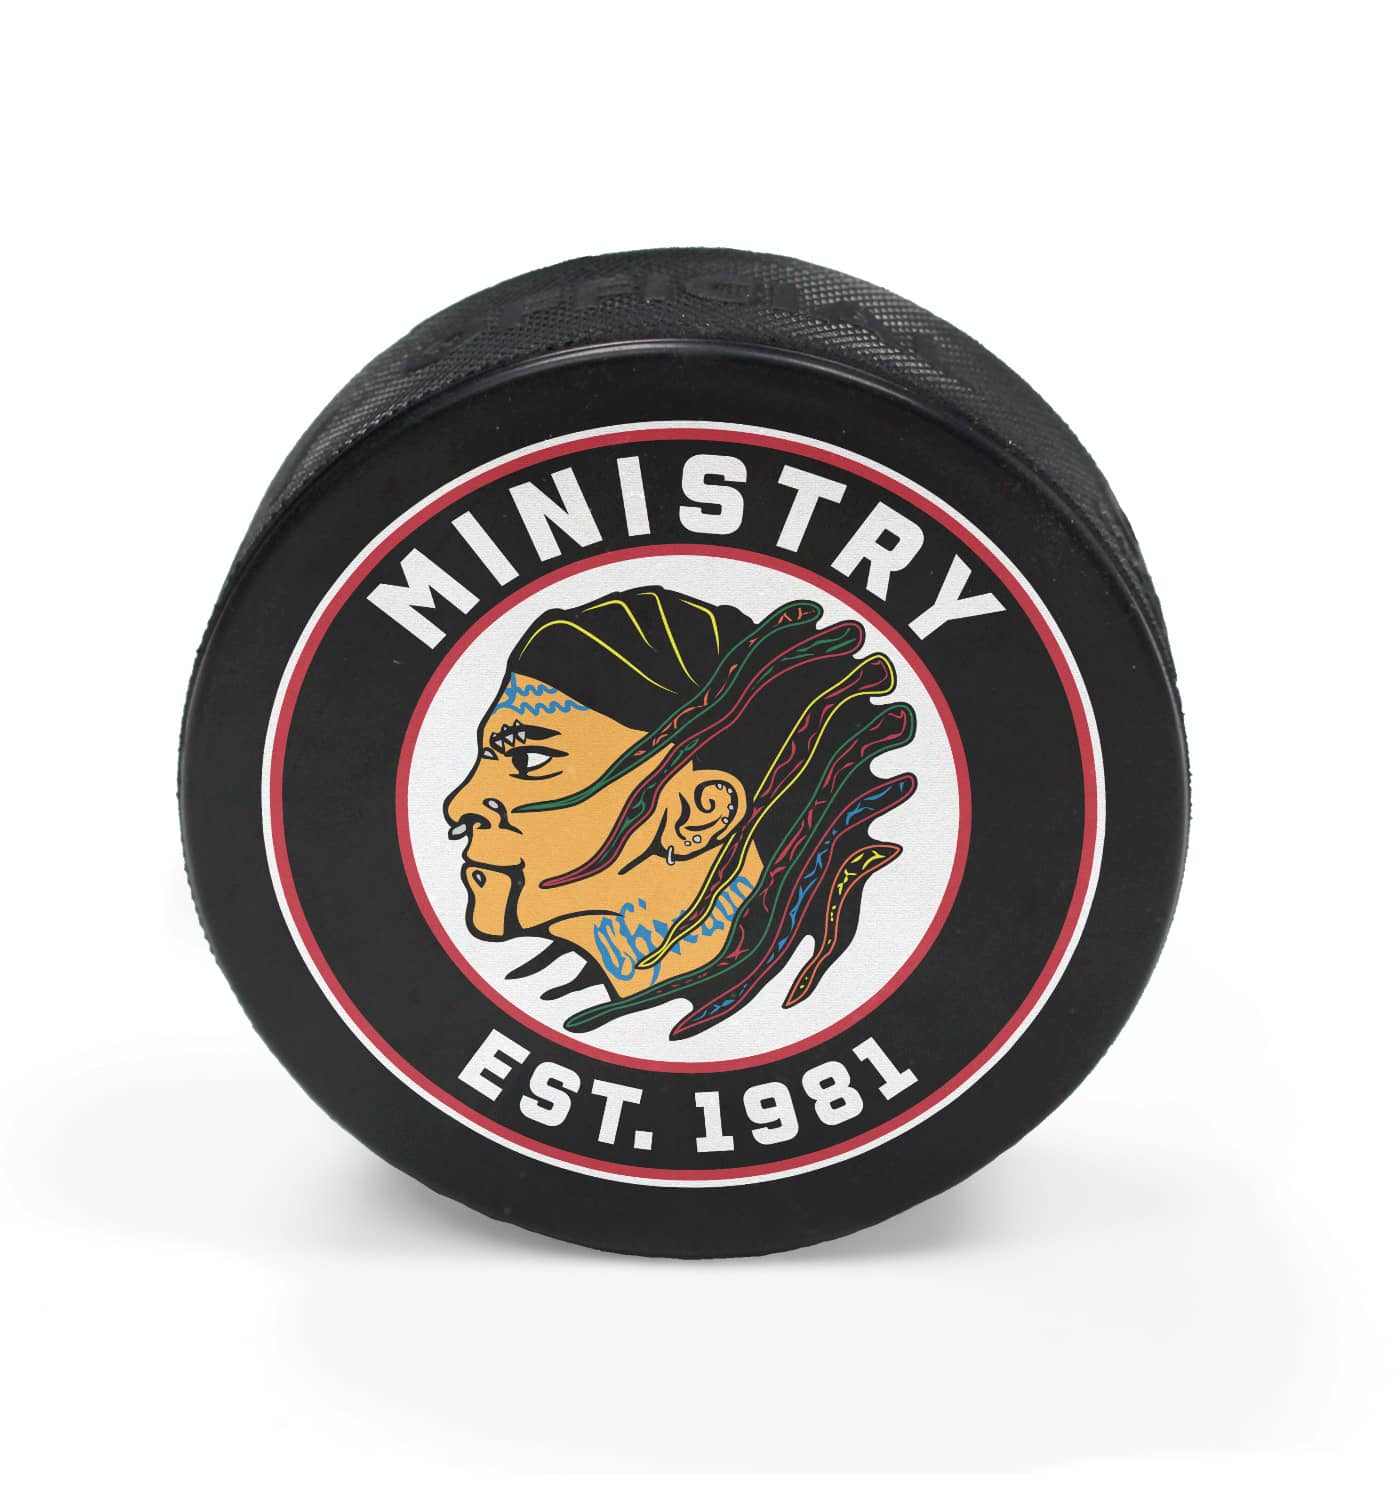 MINISTRY 'UNCLE AL WINDY CITY' limited edition hockey puck